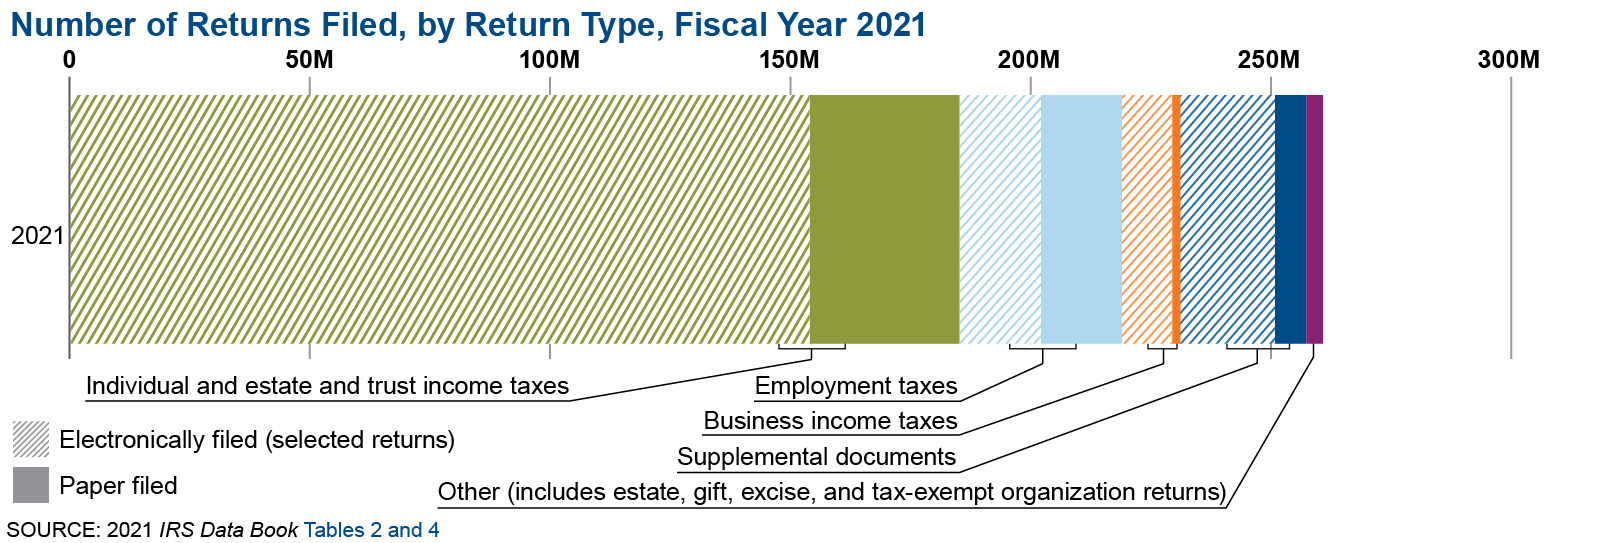 Graphic shows the number of returns filed by return type for fiscal year 2021. Of the 261 million total returns and other forms filed, more than 203 million of these were filed electronically. 